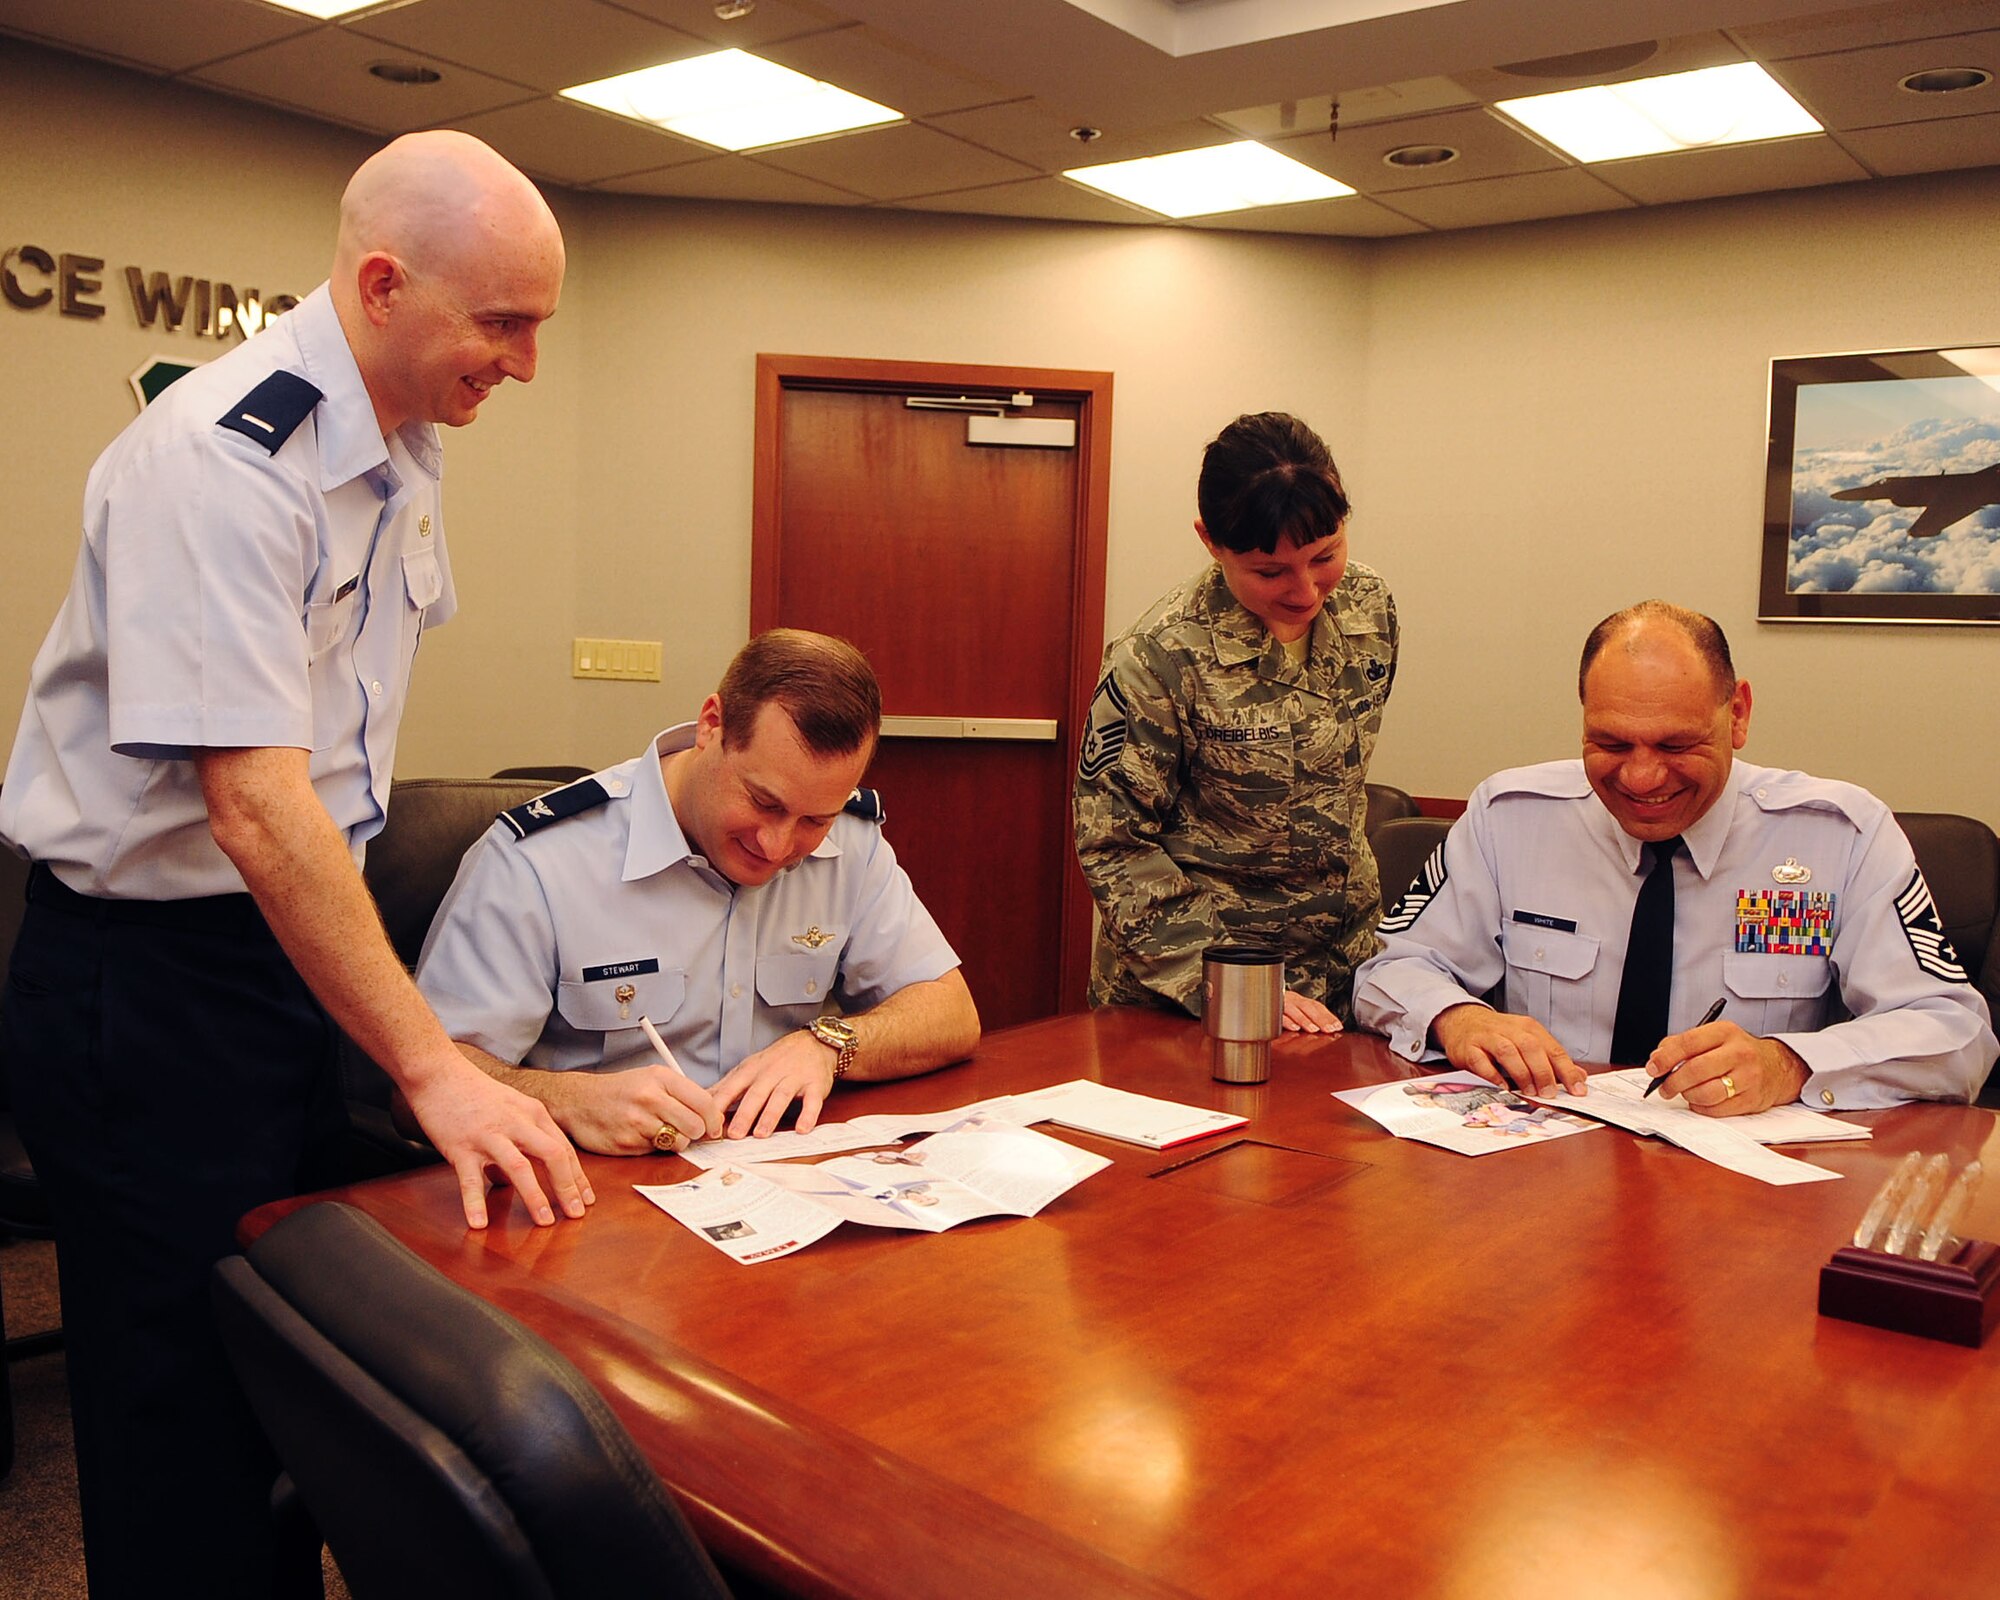 Col. Phillip Stewart, 9th Reconnaissance Wing (RW) vice commander, and Chief Master Sgt. Robert White, 9 RW command chief, fill out Air Force Assistance Fund (AFAF) pledges while 1st Lt. Jeremy Miller and Senior Master Sgt. Geri Dreibelbis, Installation Project Officers for AFAF, assist them at Beale Air Force Base, Calif. March 5, 2012.  The Air Force Assistance Fund is a program designed to raise money to assist Beale Airmen during times of need.  (U.S. Air Force photo by Staff Sergeant Jonathan Fowler/Released)